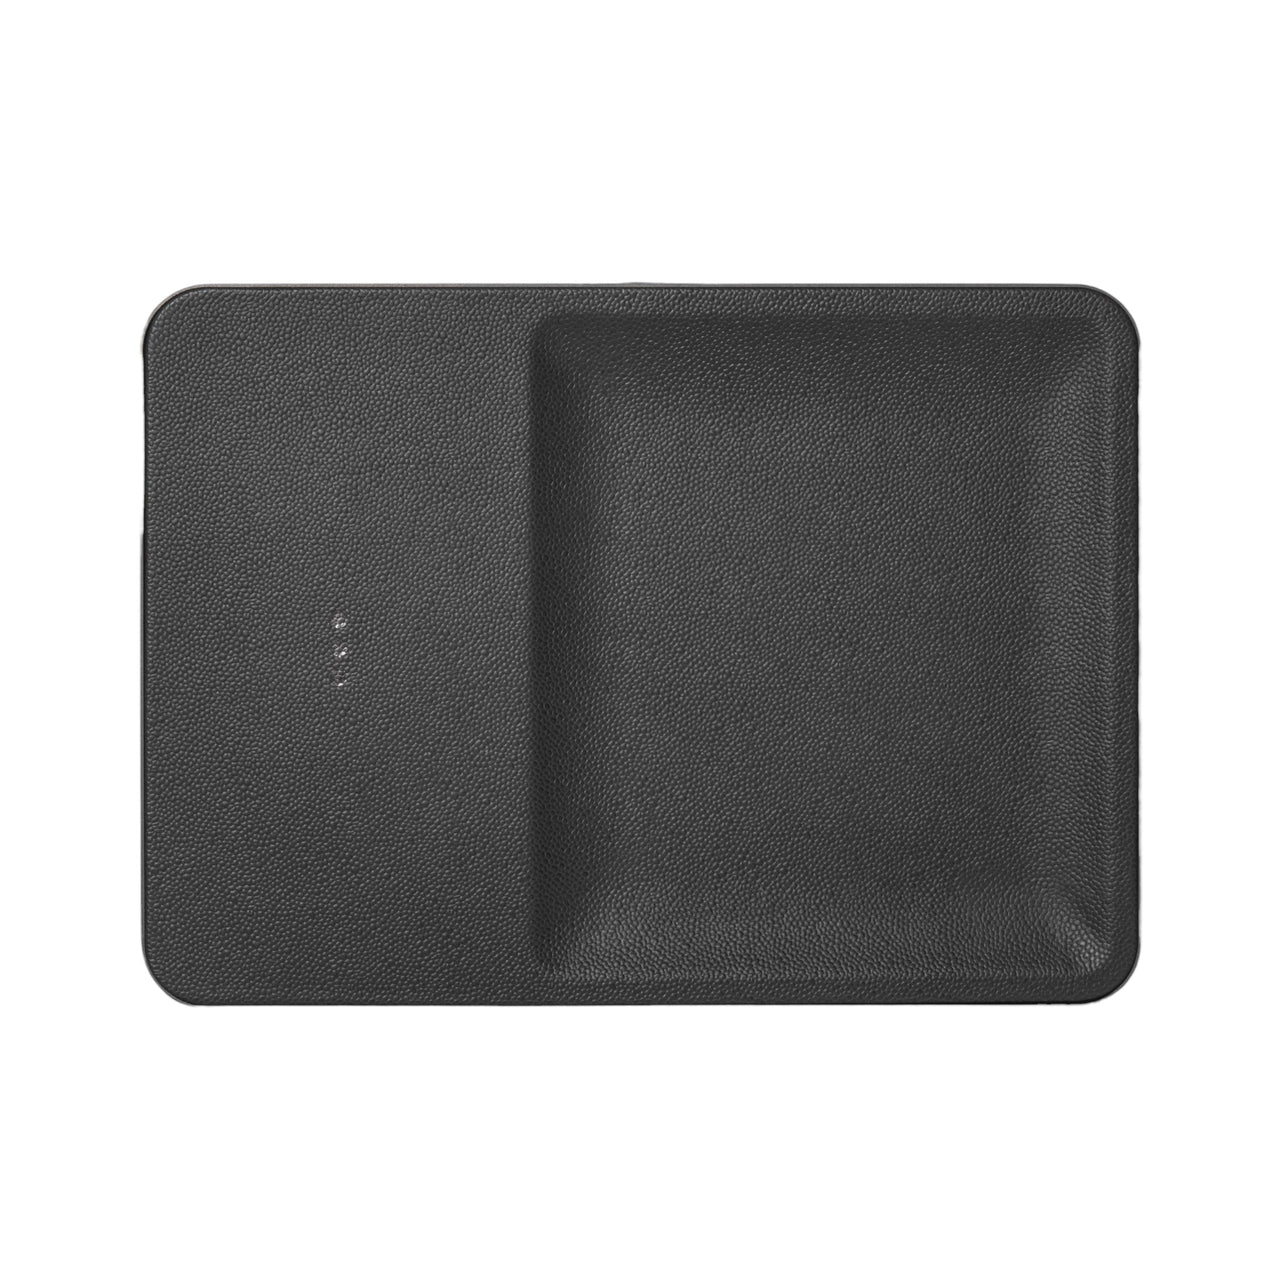 Catch 3 | Ash Leather Wireless Charger with Valet Tray